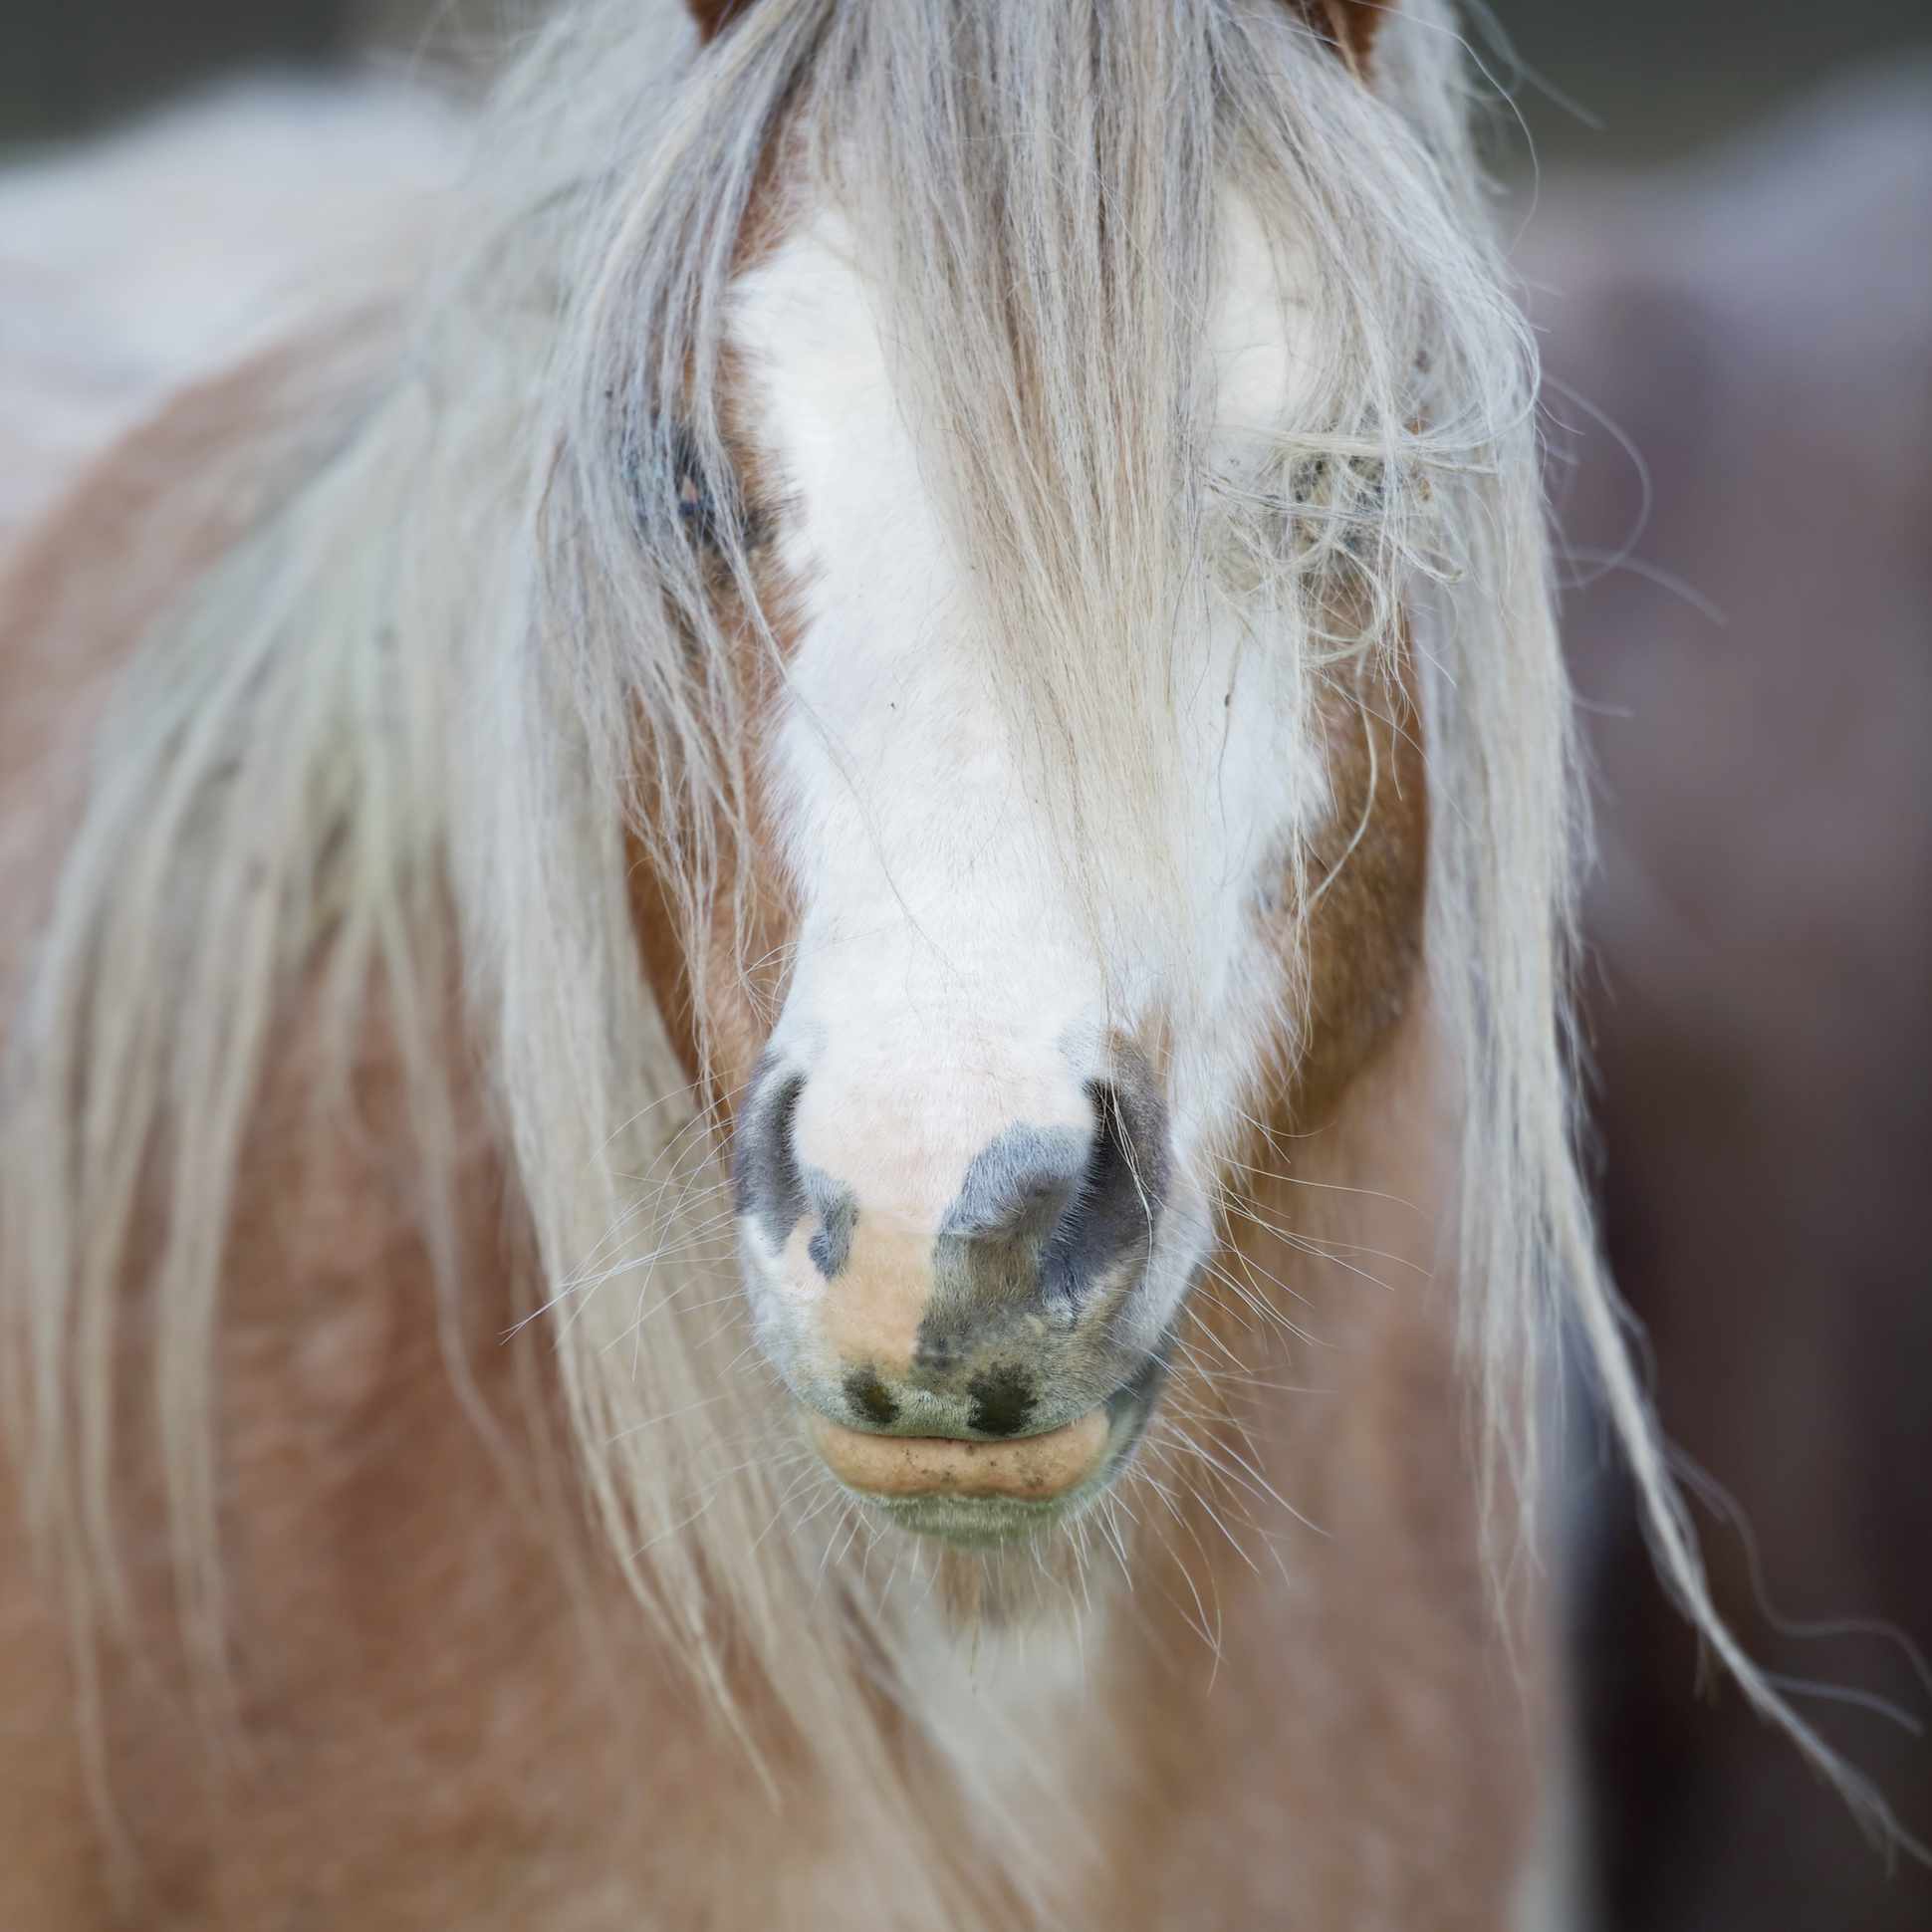 Welsh Mountain Pony (Equus ferus caballus) with long mane. Descendent of the ancient Celtic mountain pony which lived wild in the hills of Wales for centuries. UK